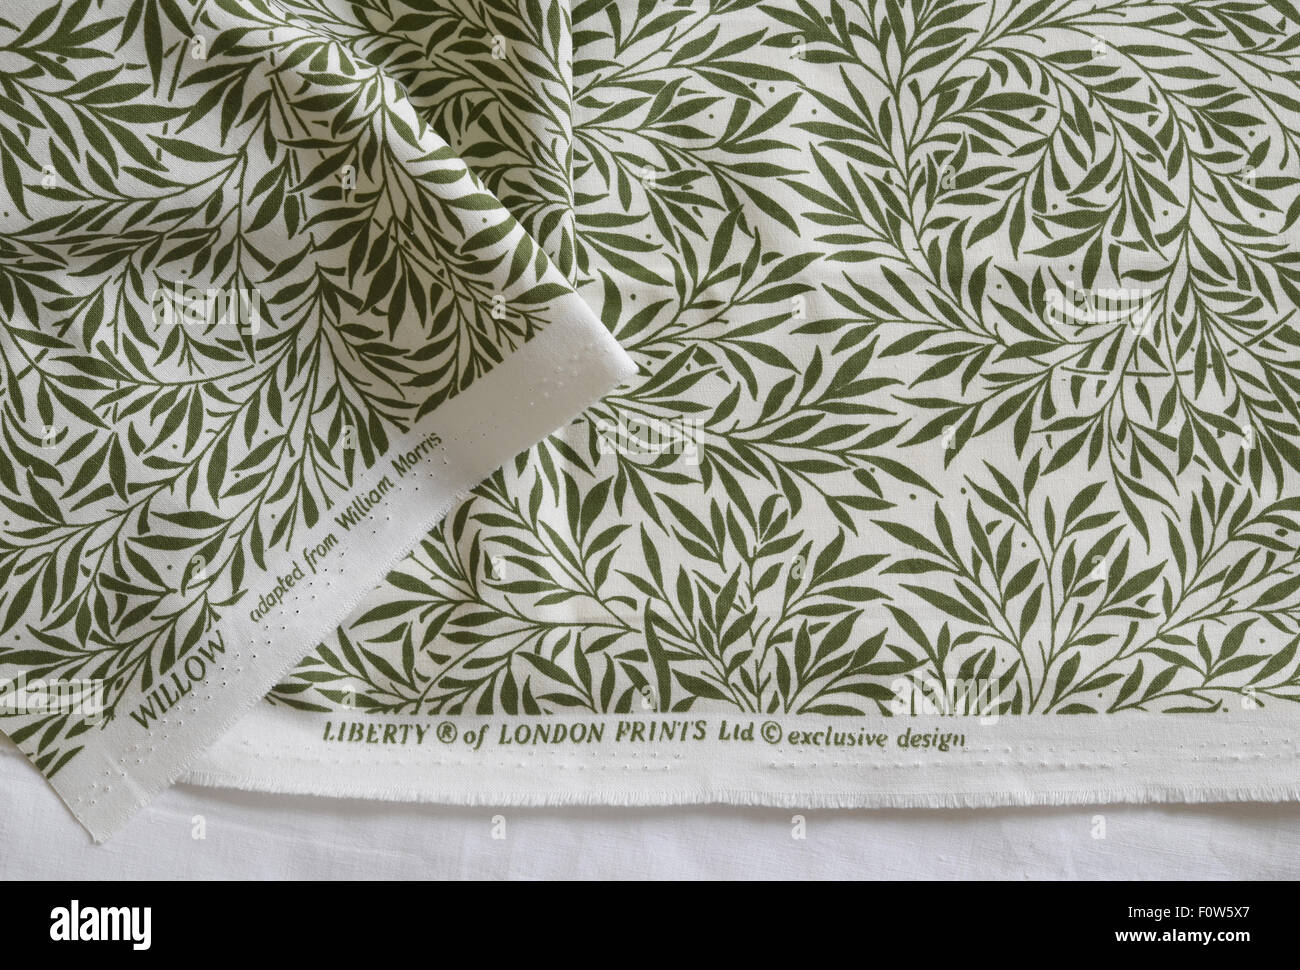 'Willow' cotton fabric by Liberty of London, adapted from a design by William Morris  of the renowned Arts & Crafts Movement. Stock Photo